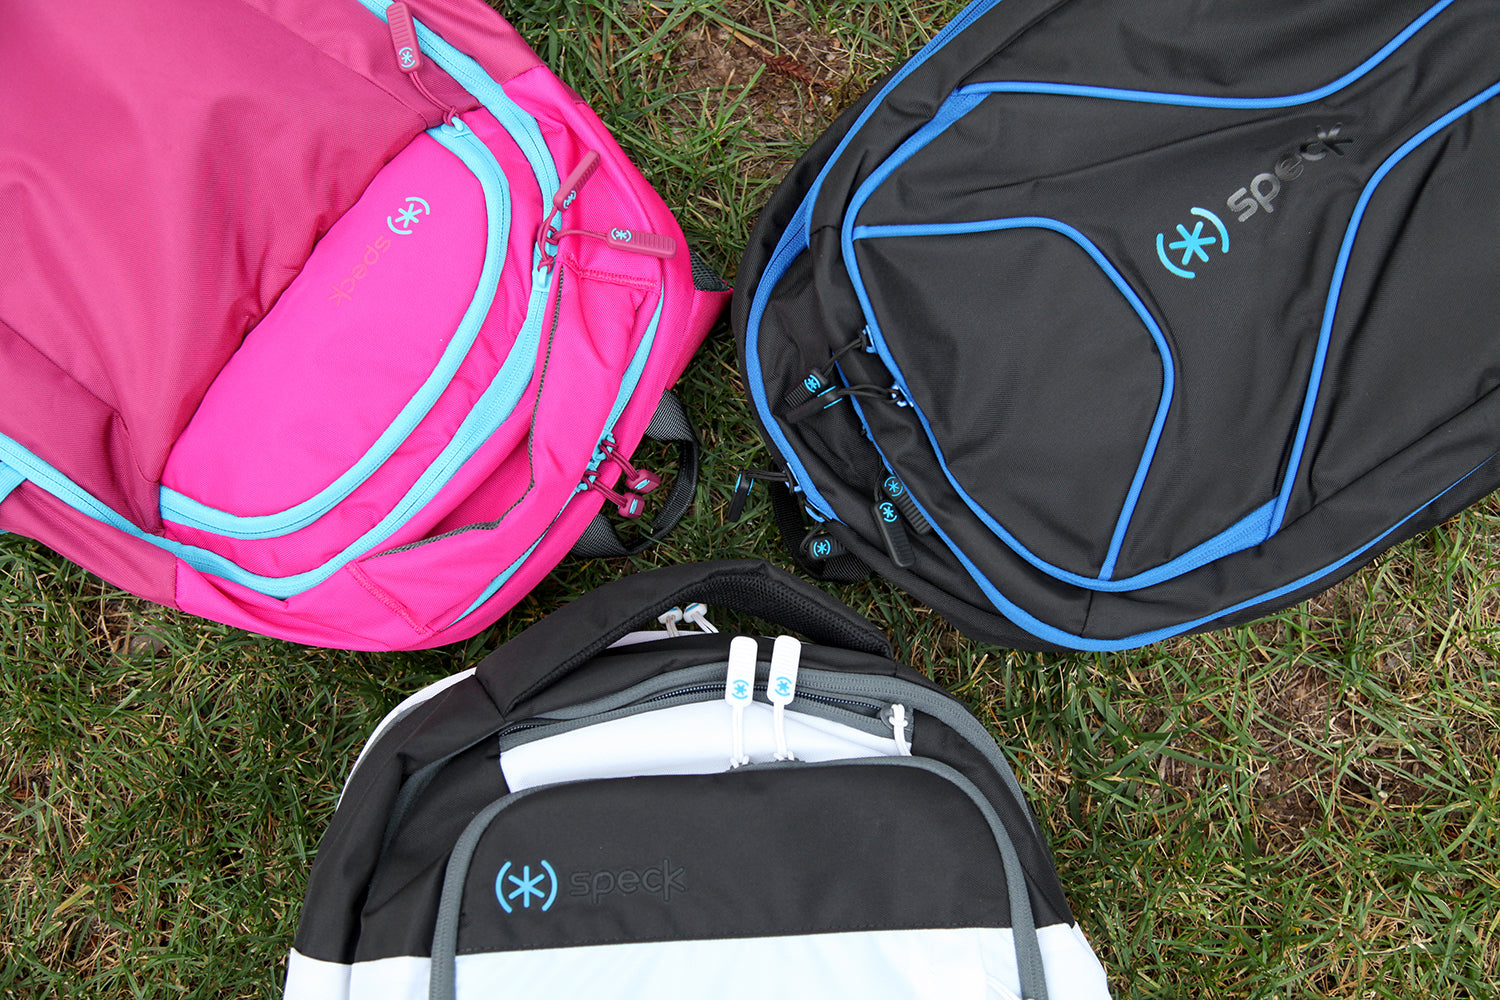 Meet our new Speck Laptop Backpacks, ready for back to school